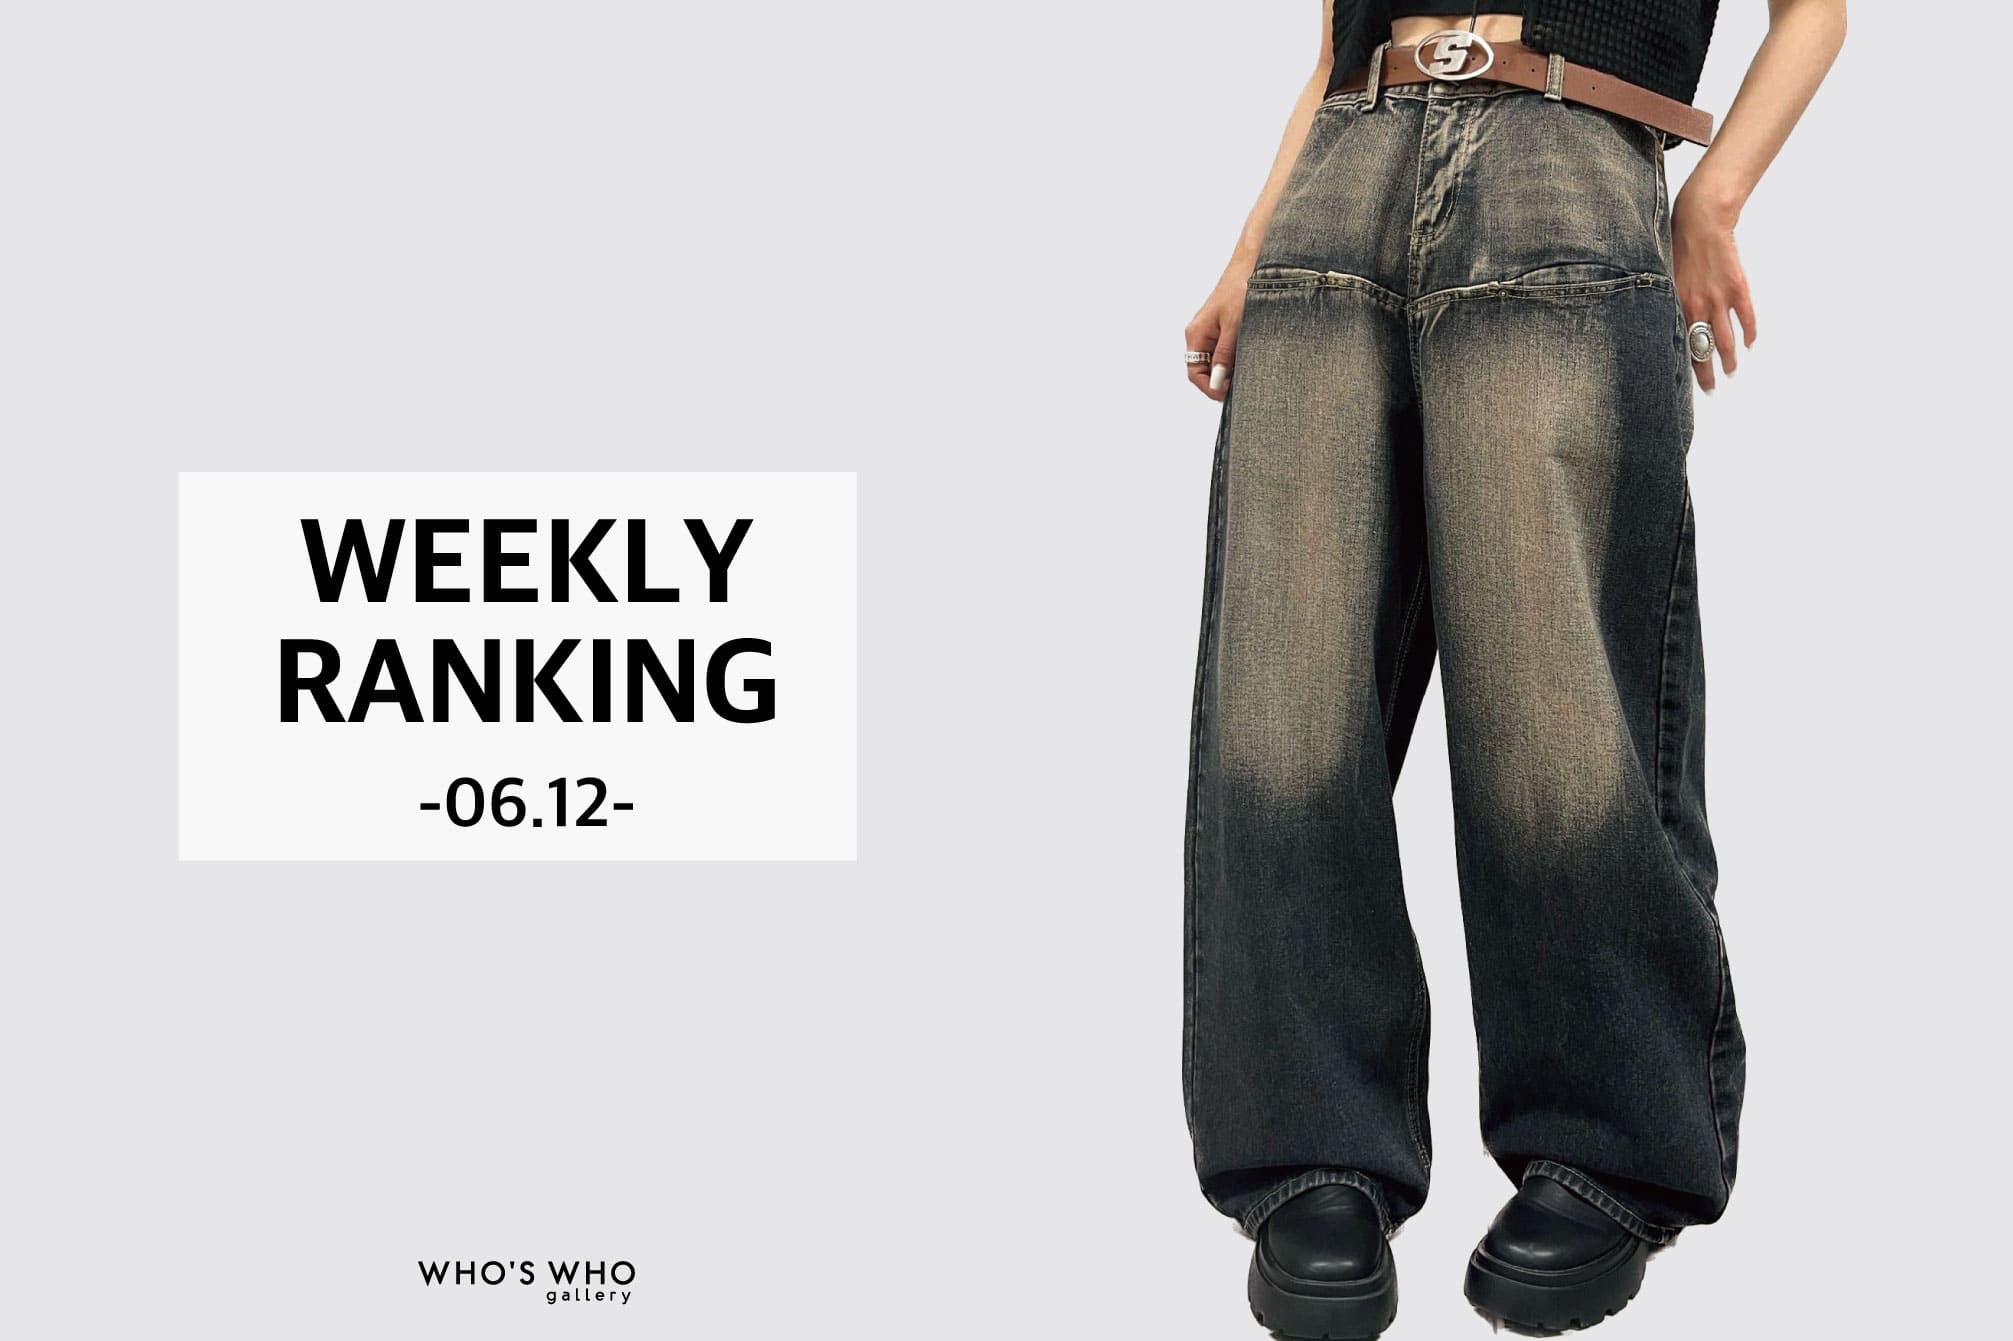 WHO’S WHO gallery 【WEEKLY RANKING -06.12-】